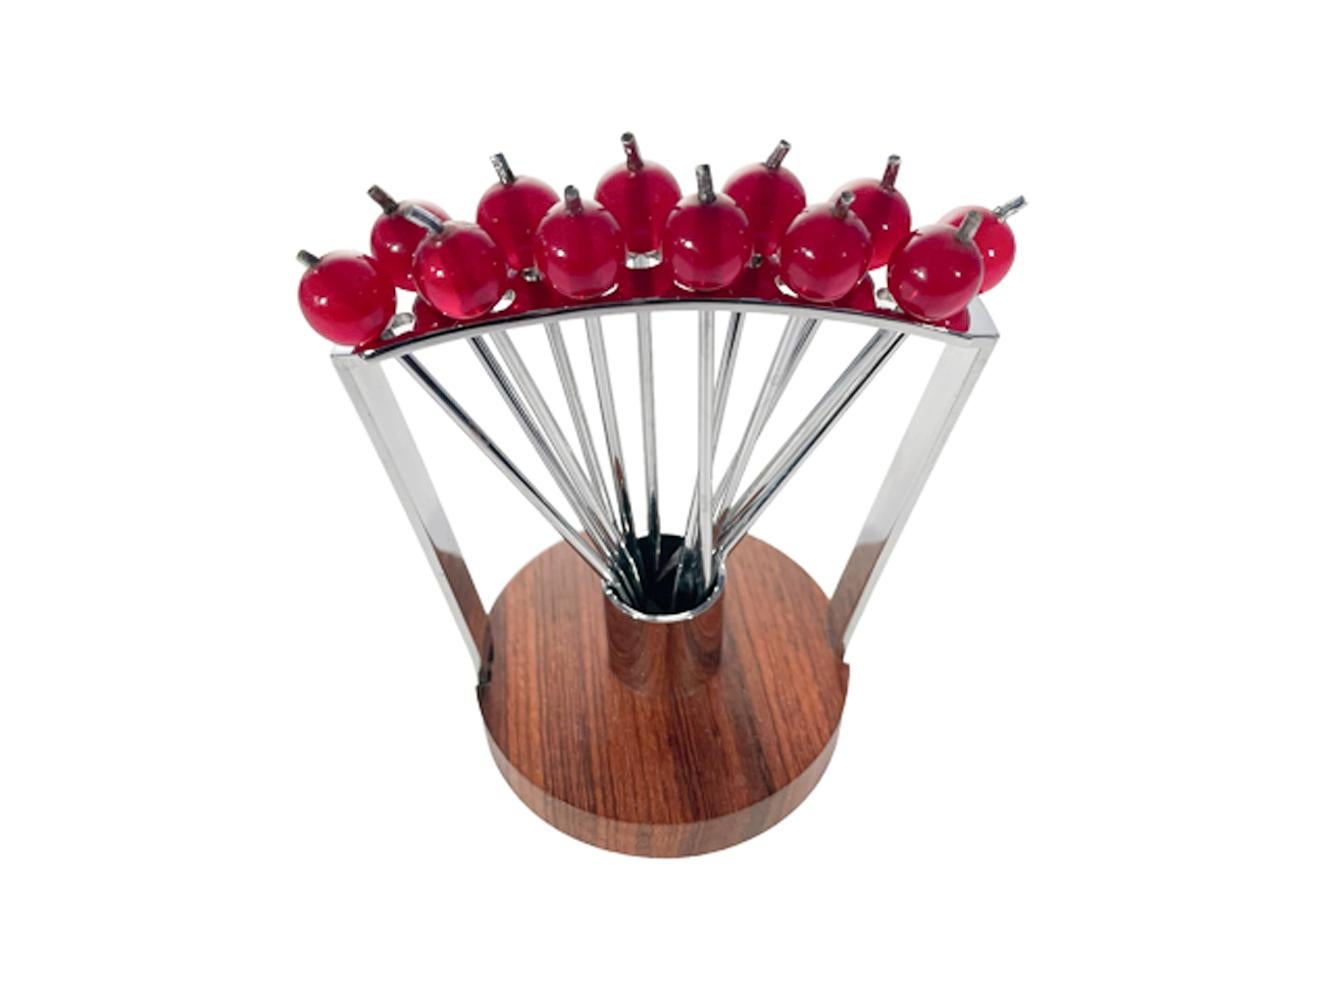 12 chromed cocktail picks with forked points and red 'cherry' tops arranged in two rows of 6 in an arched chrome frame rising from a wood disk base with a central chrome cylinder which the picks hang in.